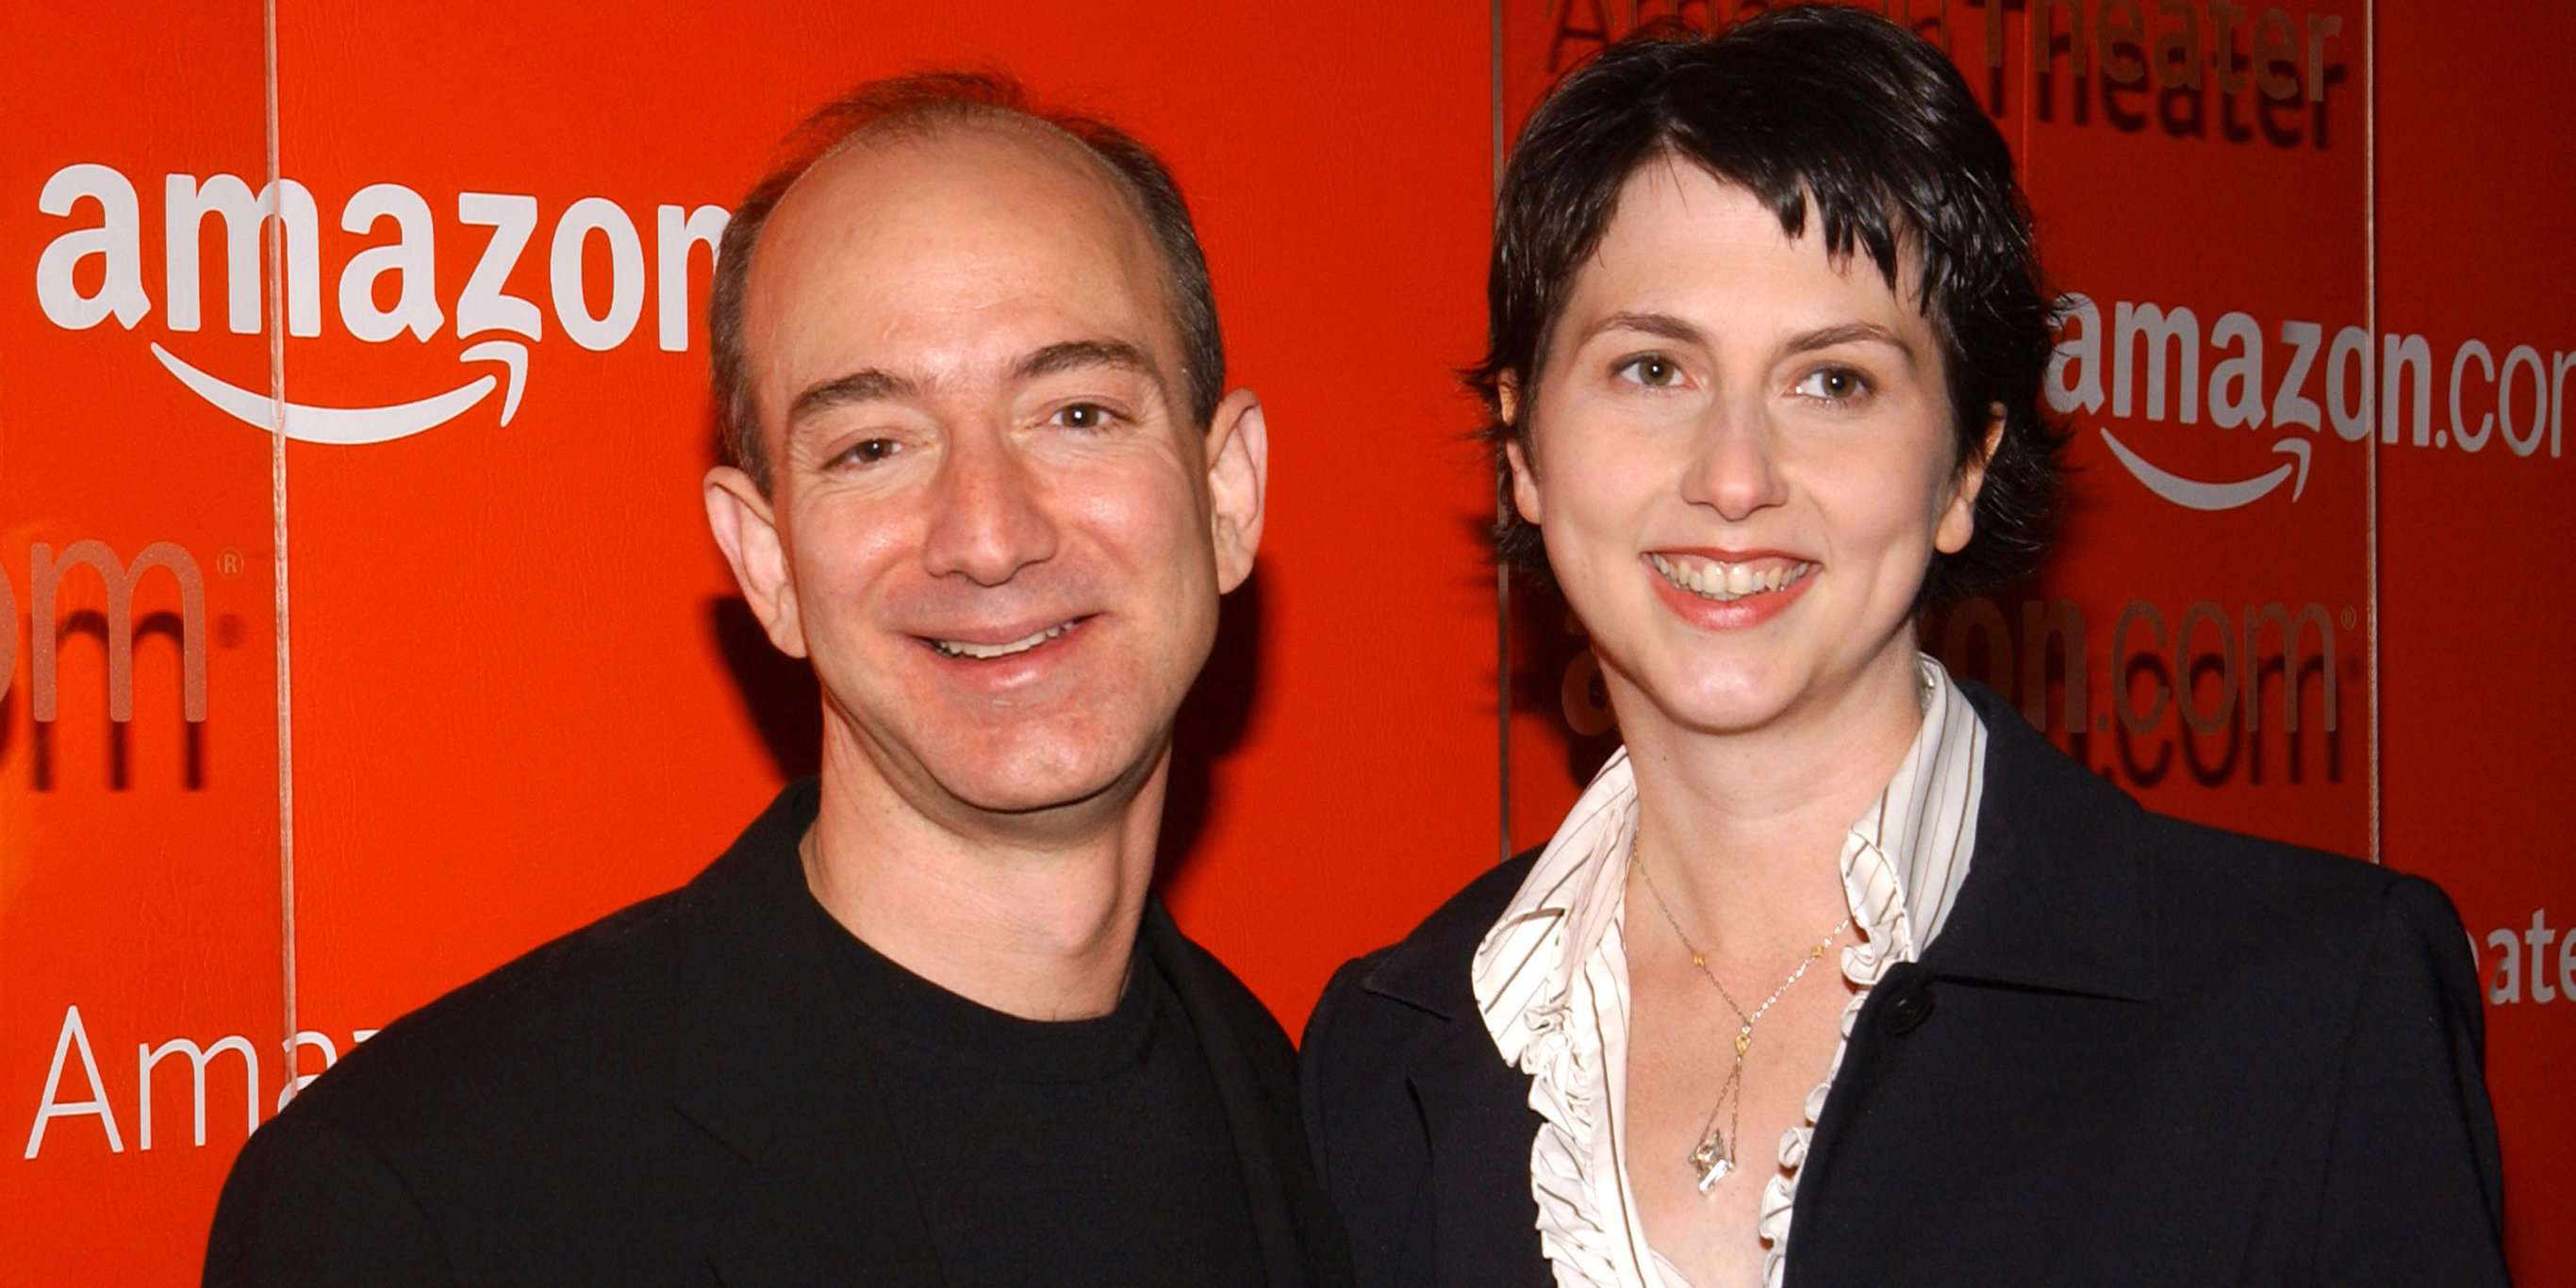 Taboola Ad Example 66986 - MacKenzie Bezos Will Become One Of The Wealthiest Women In The World. Here's How She Went From One Of Amazon's First Employees To An Award-winning Novelist.